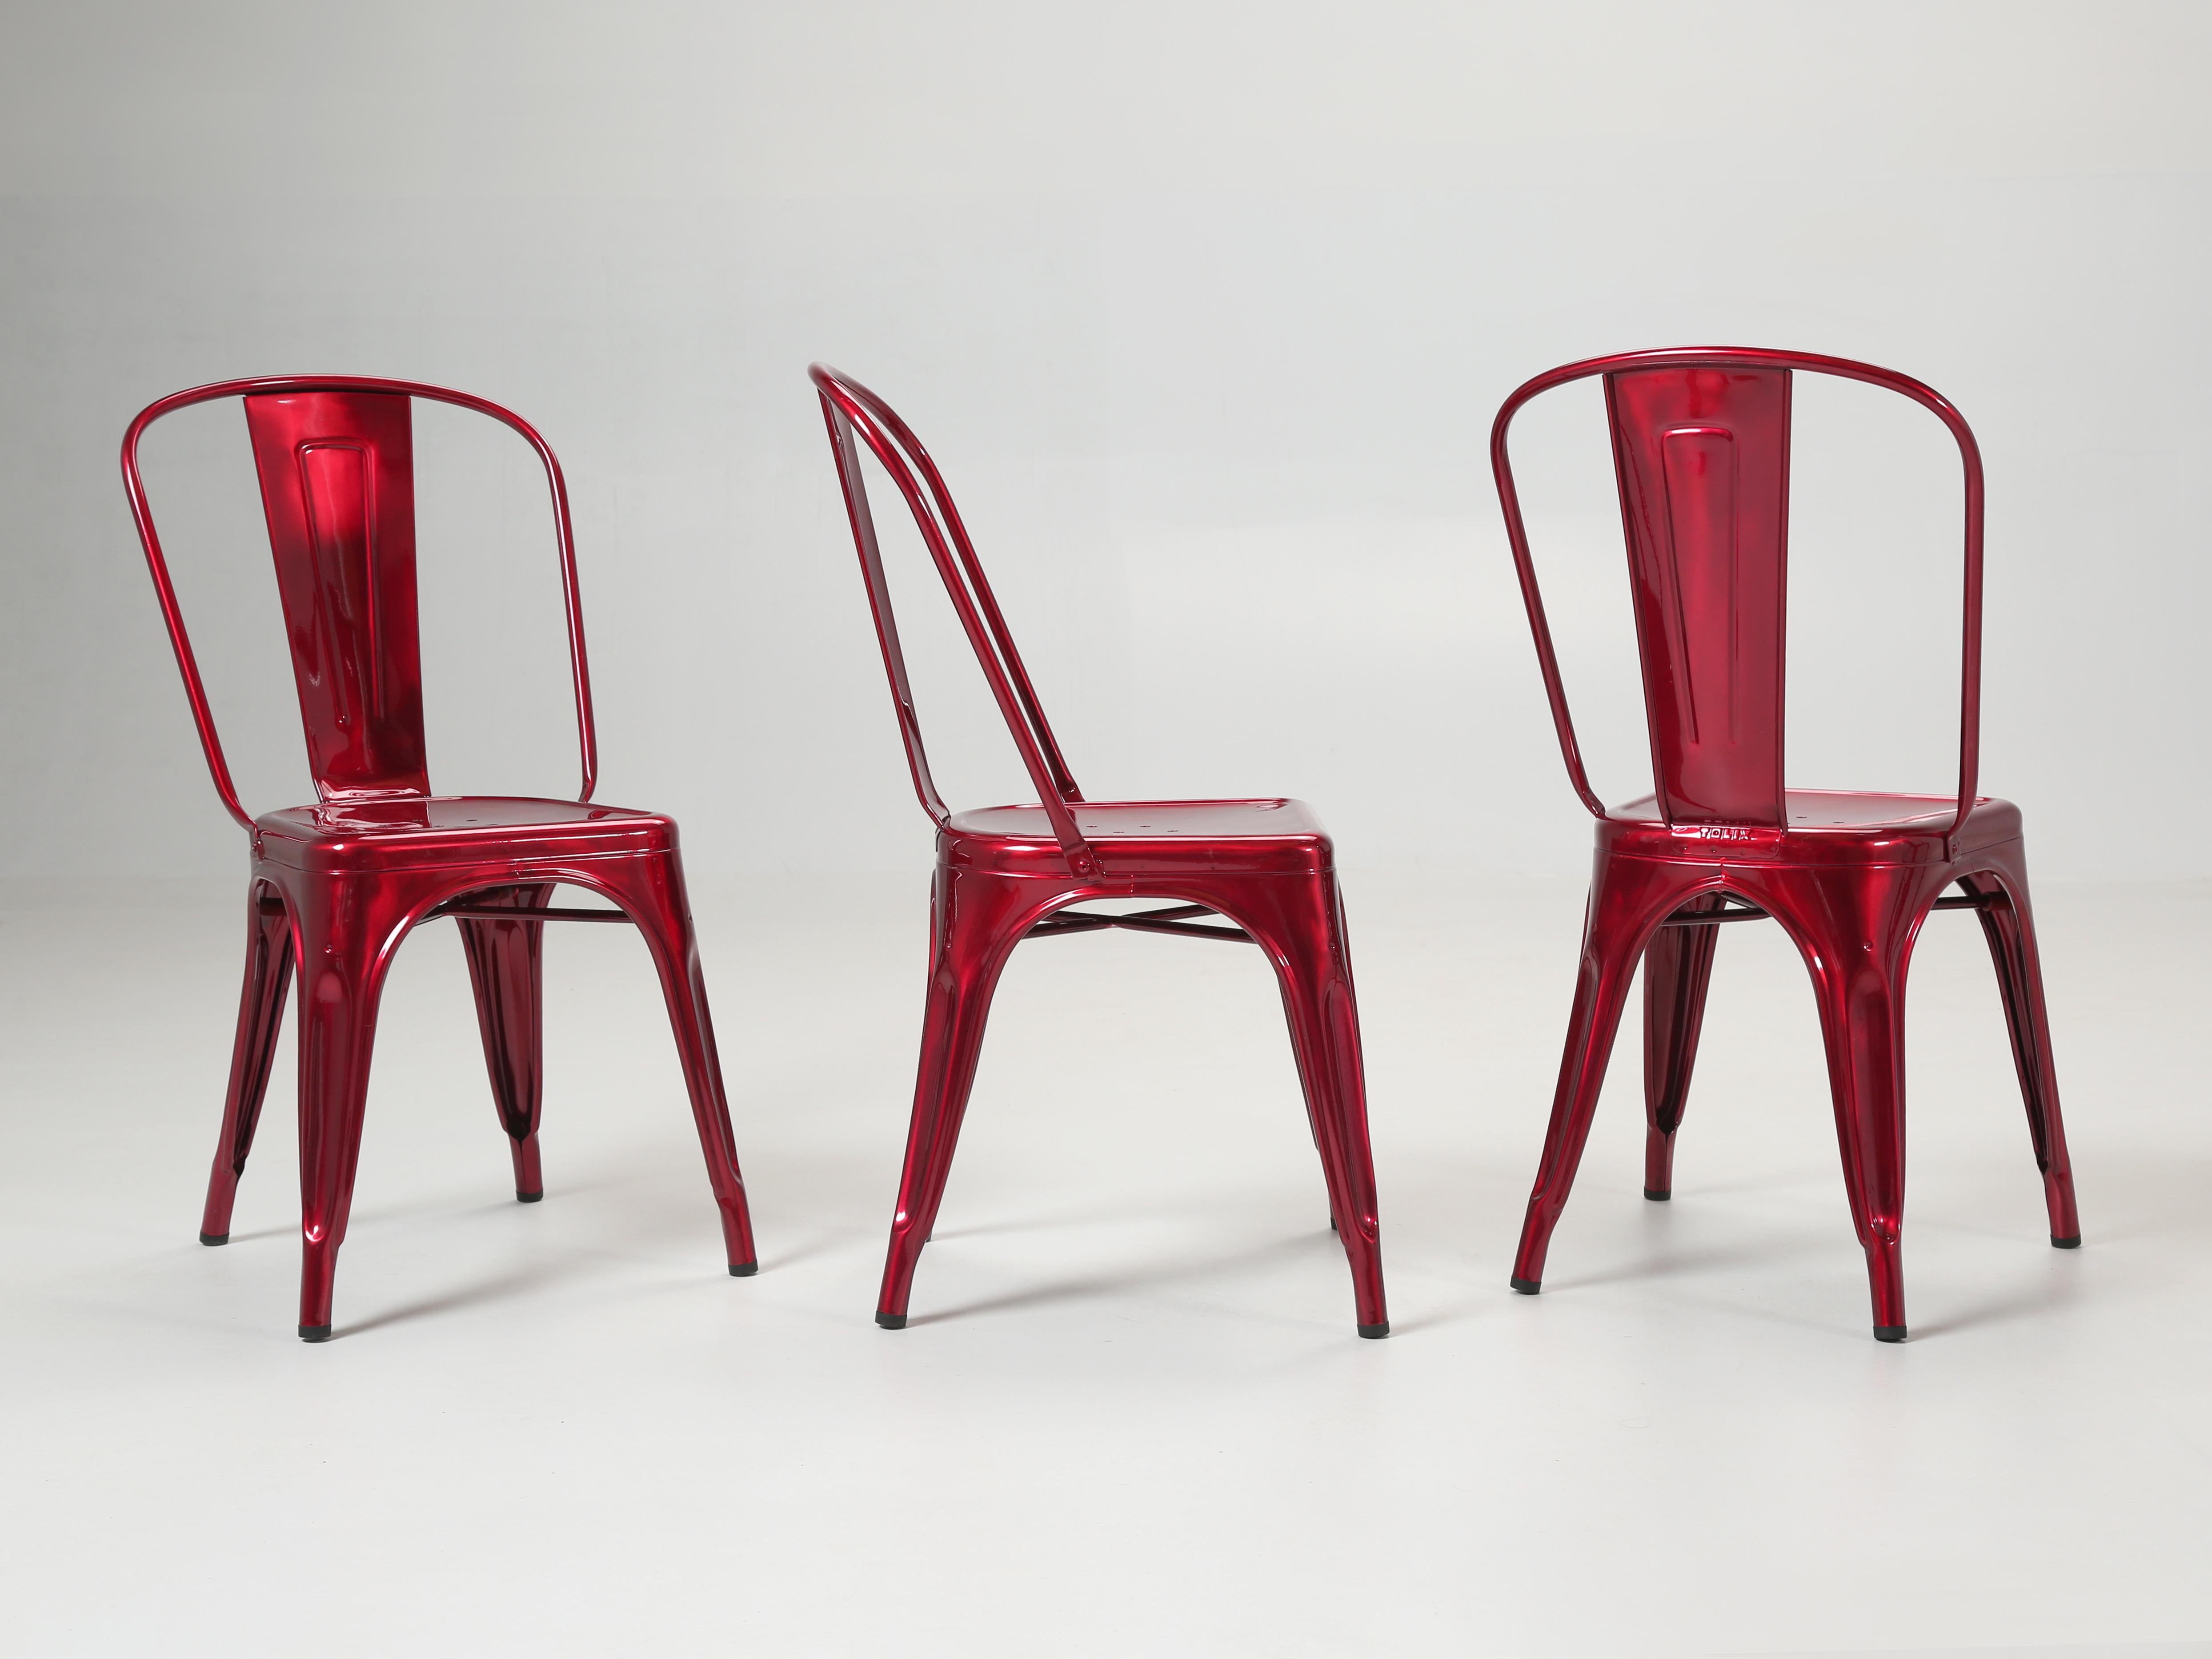 Industrial Tolix Set of (4) Steel Stacking Chairs in a Brilliant Candy Apple Red Metallic